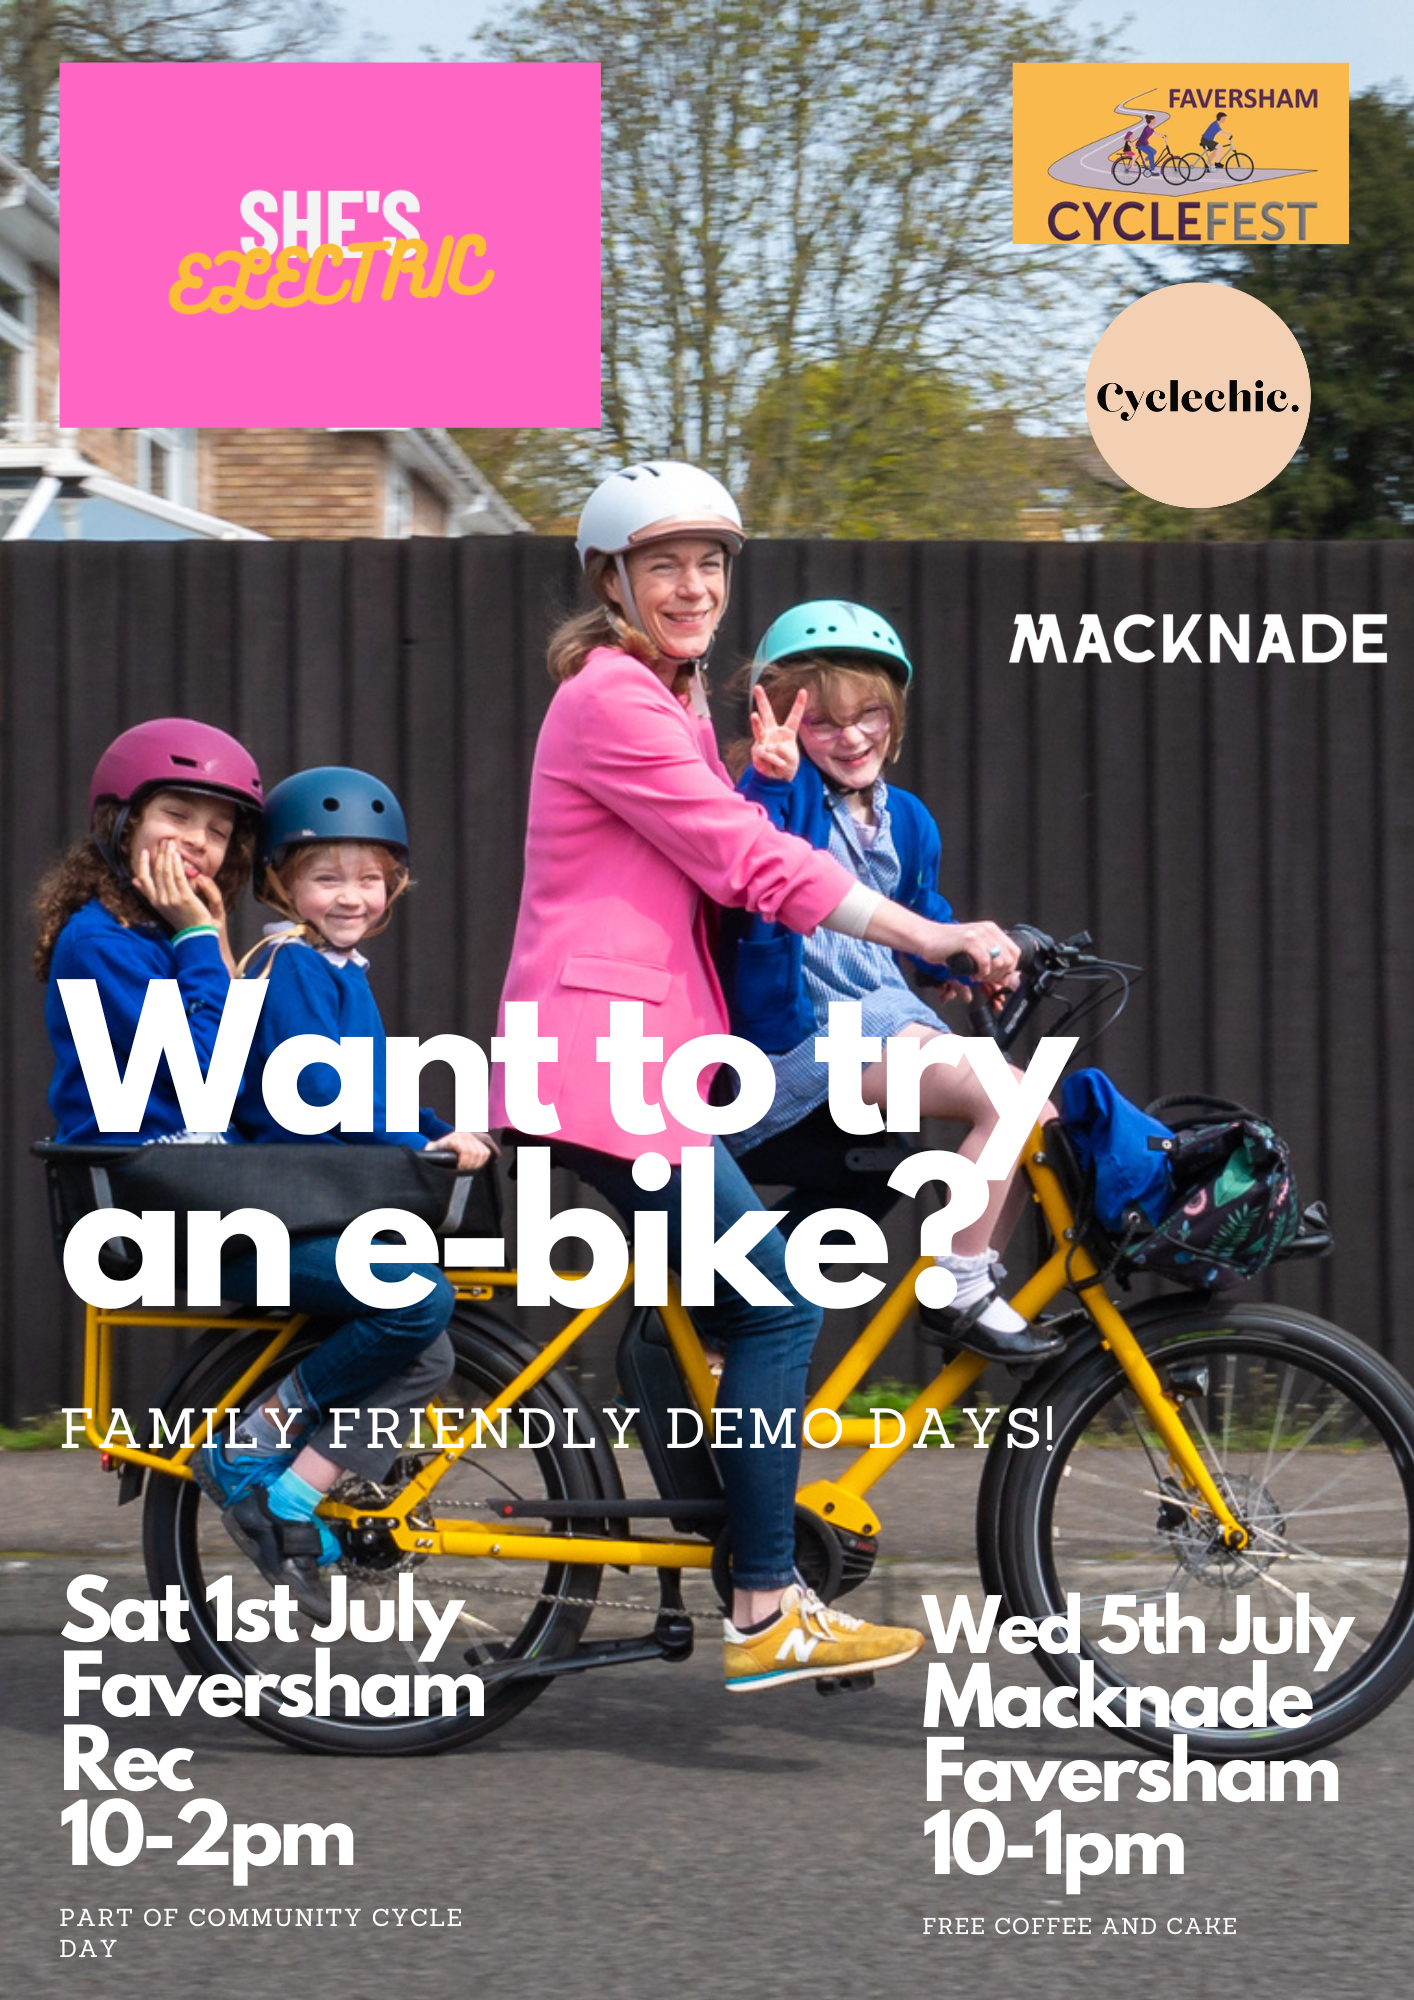 She's Electric and Faversham Cycle Fest event poster, sat 1st July 2023, The Rec 10-2pm